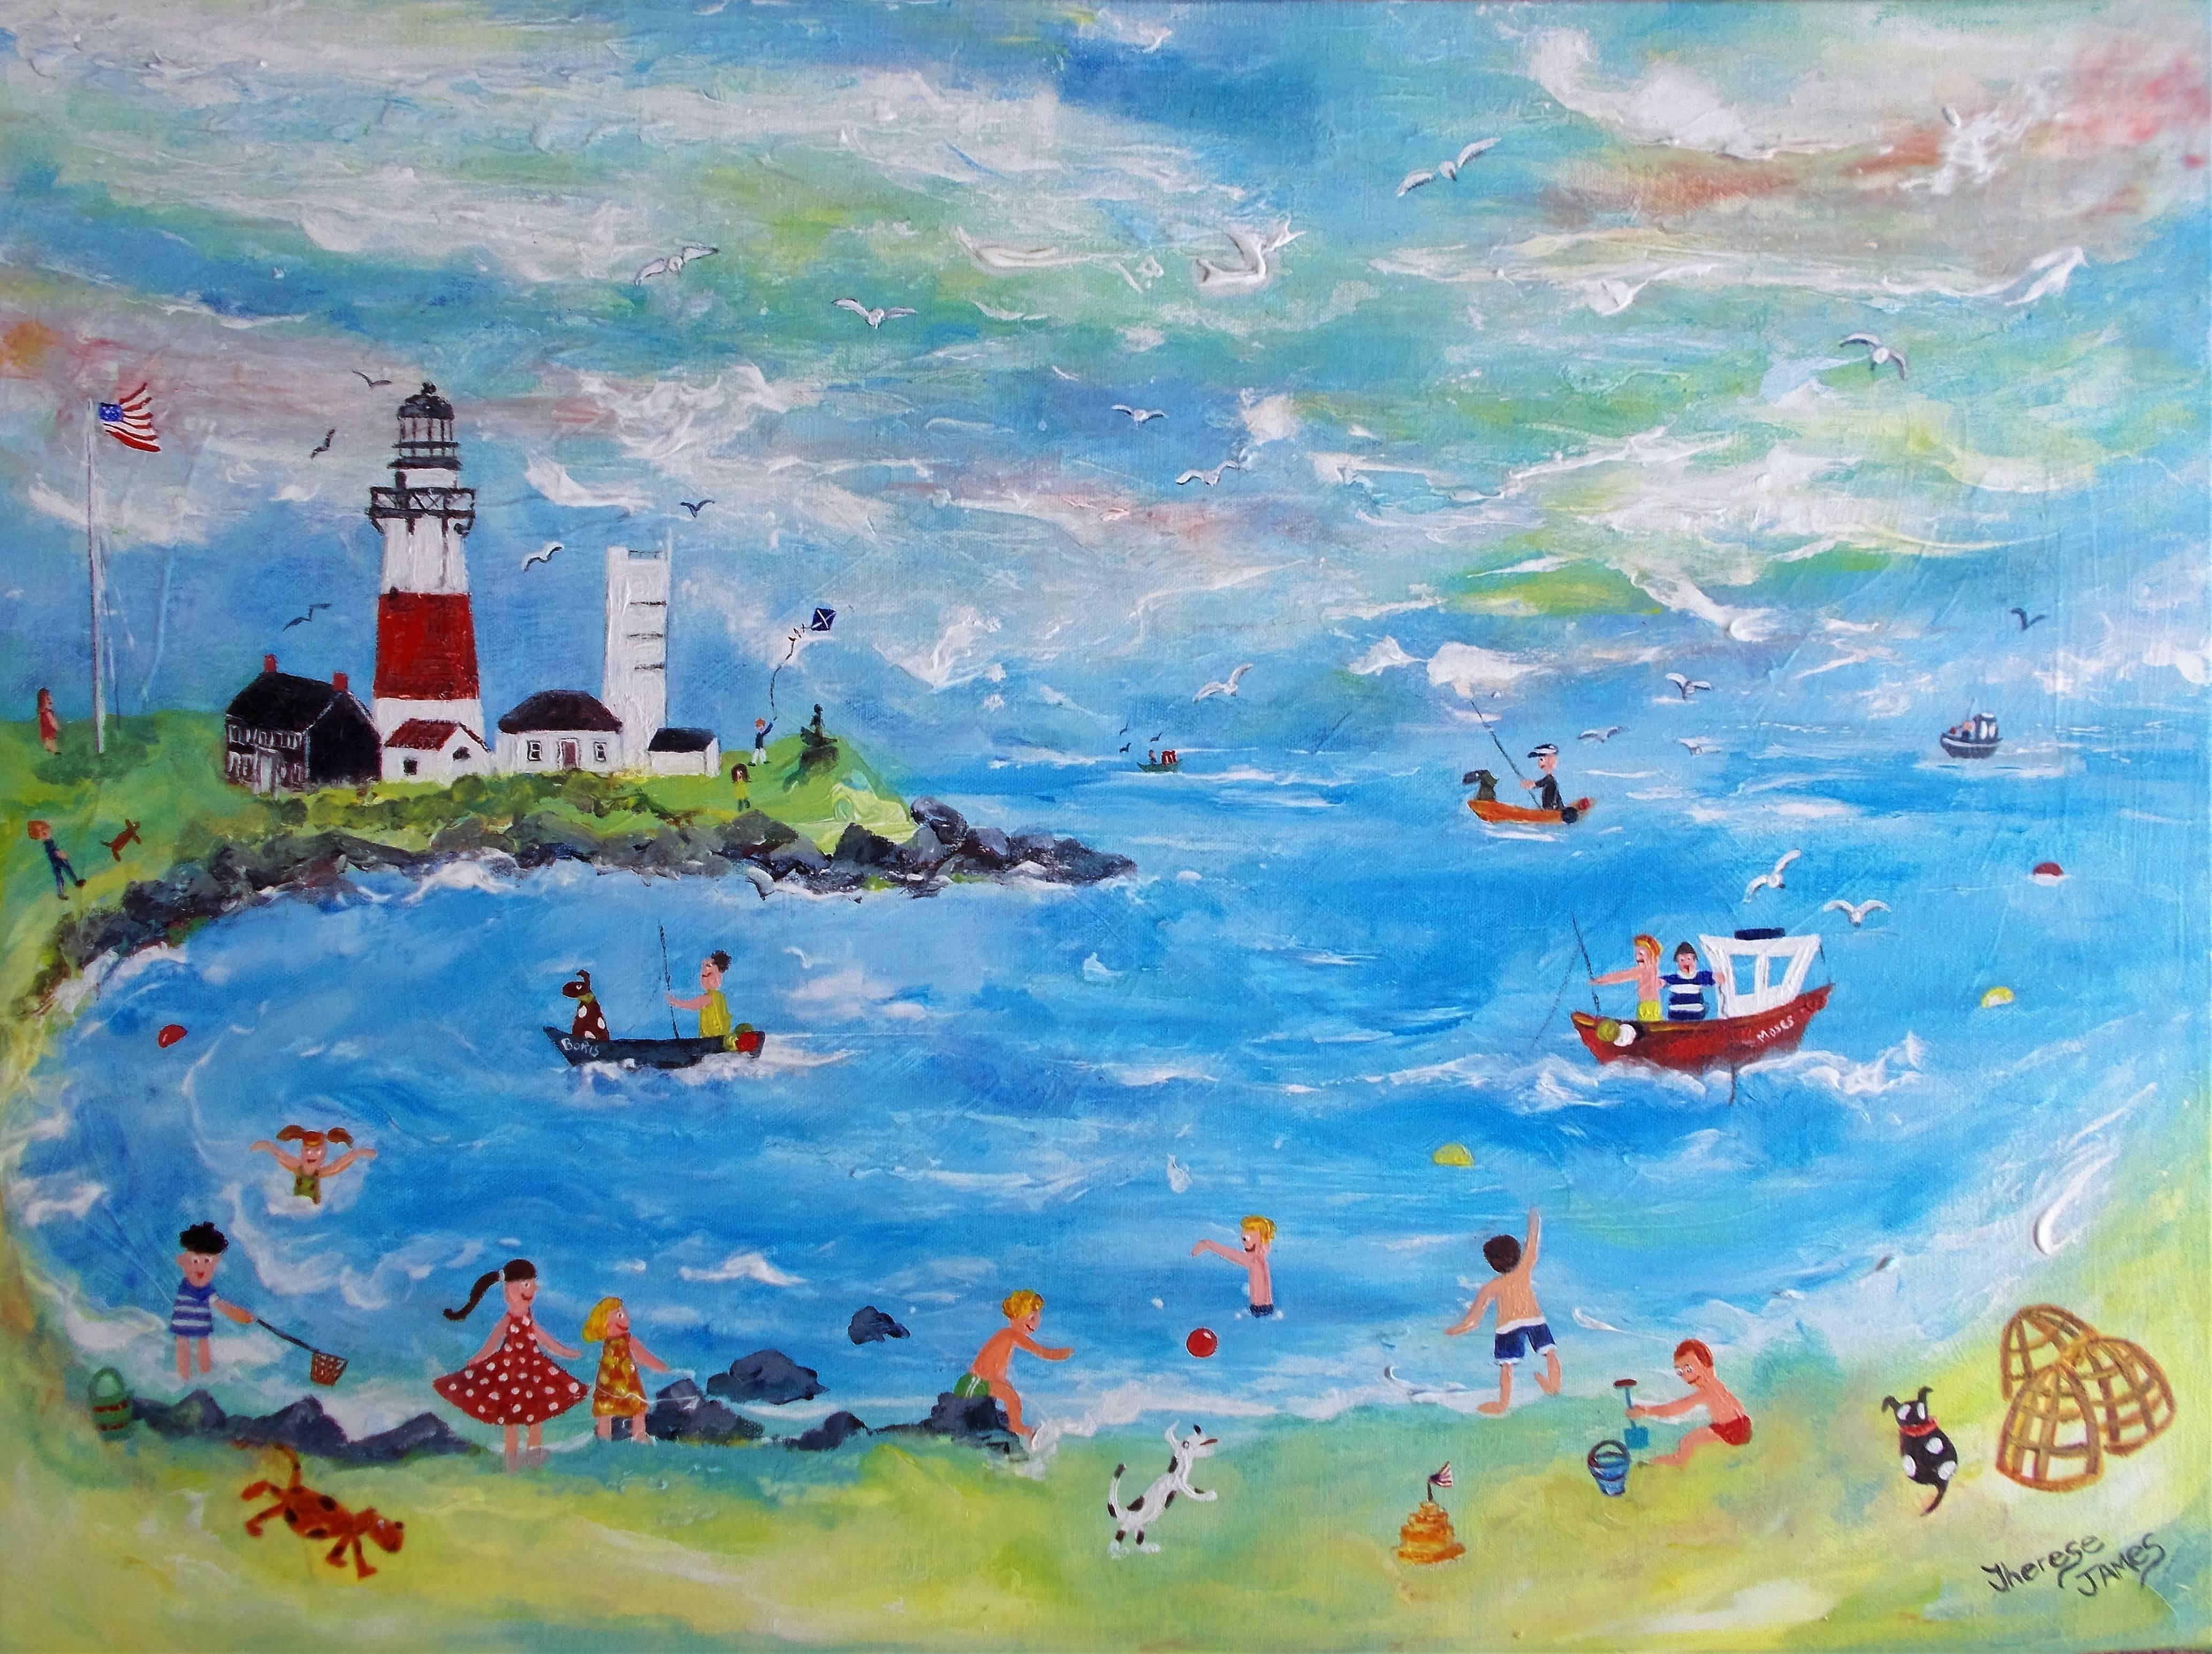 Therese James Figurative Painting - "Montauk Point Lighthouse" Contemporary British Naive School Painting